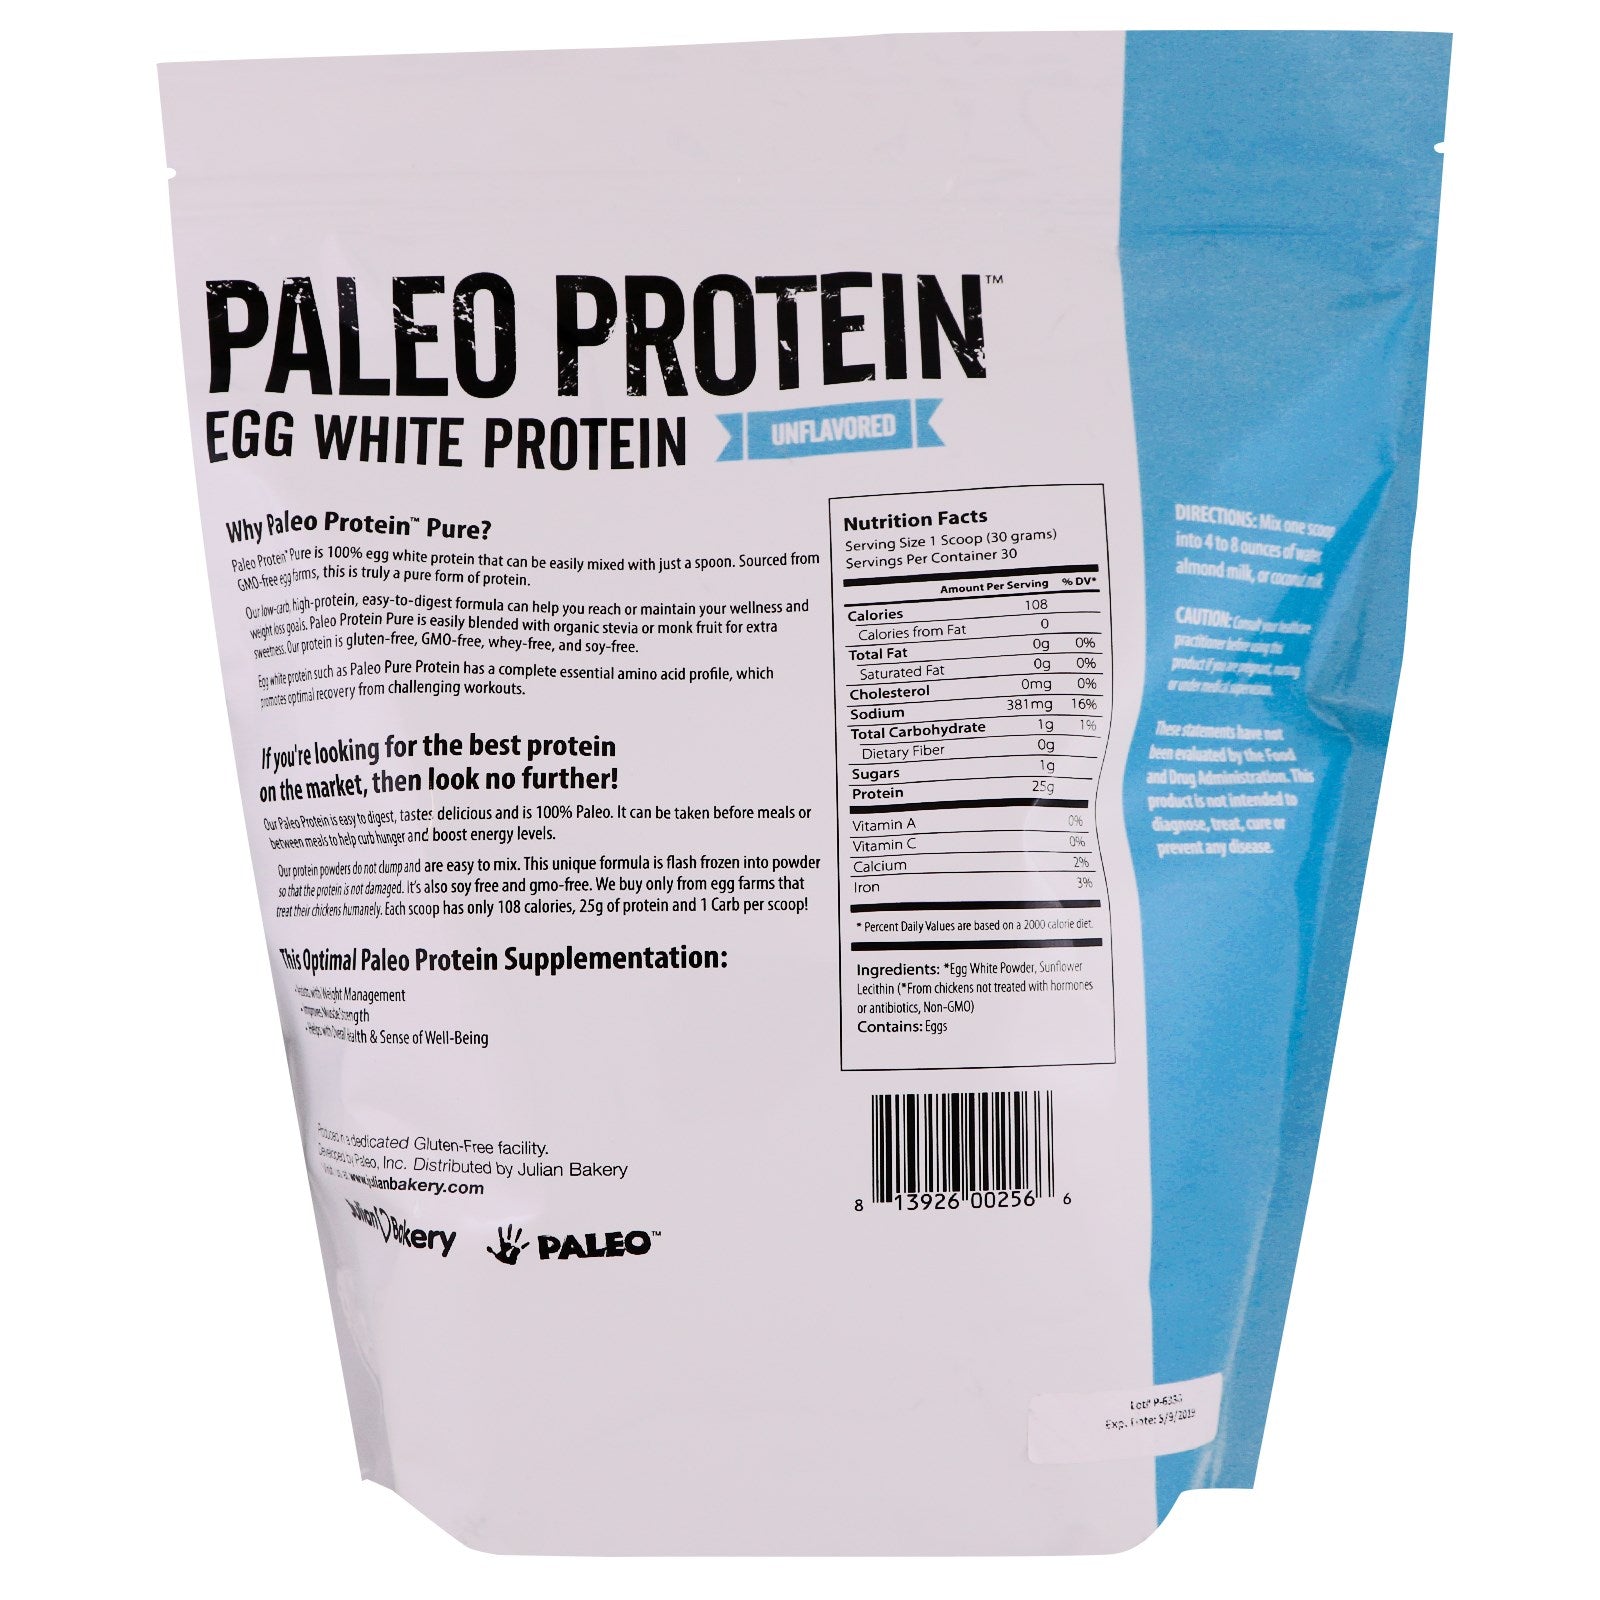 Julian Bakery, Paleo Protein, Egg White Protein, Unflavored, 2 lbs (907 g)